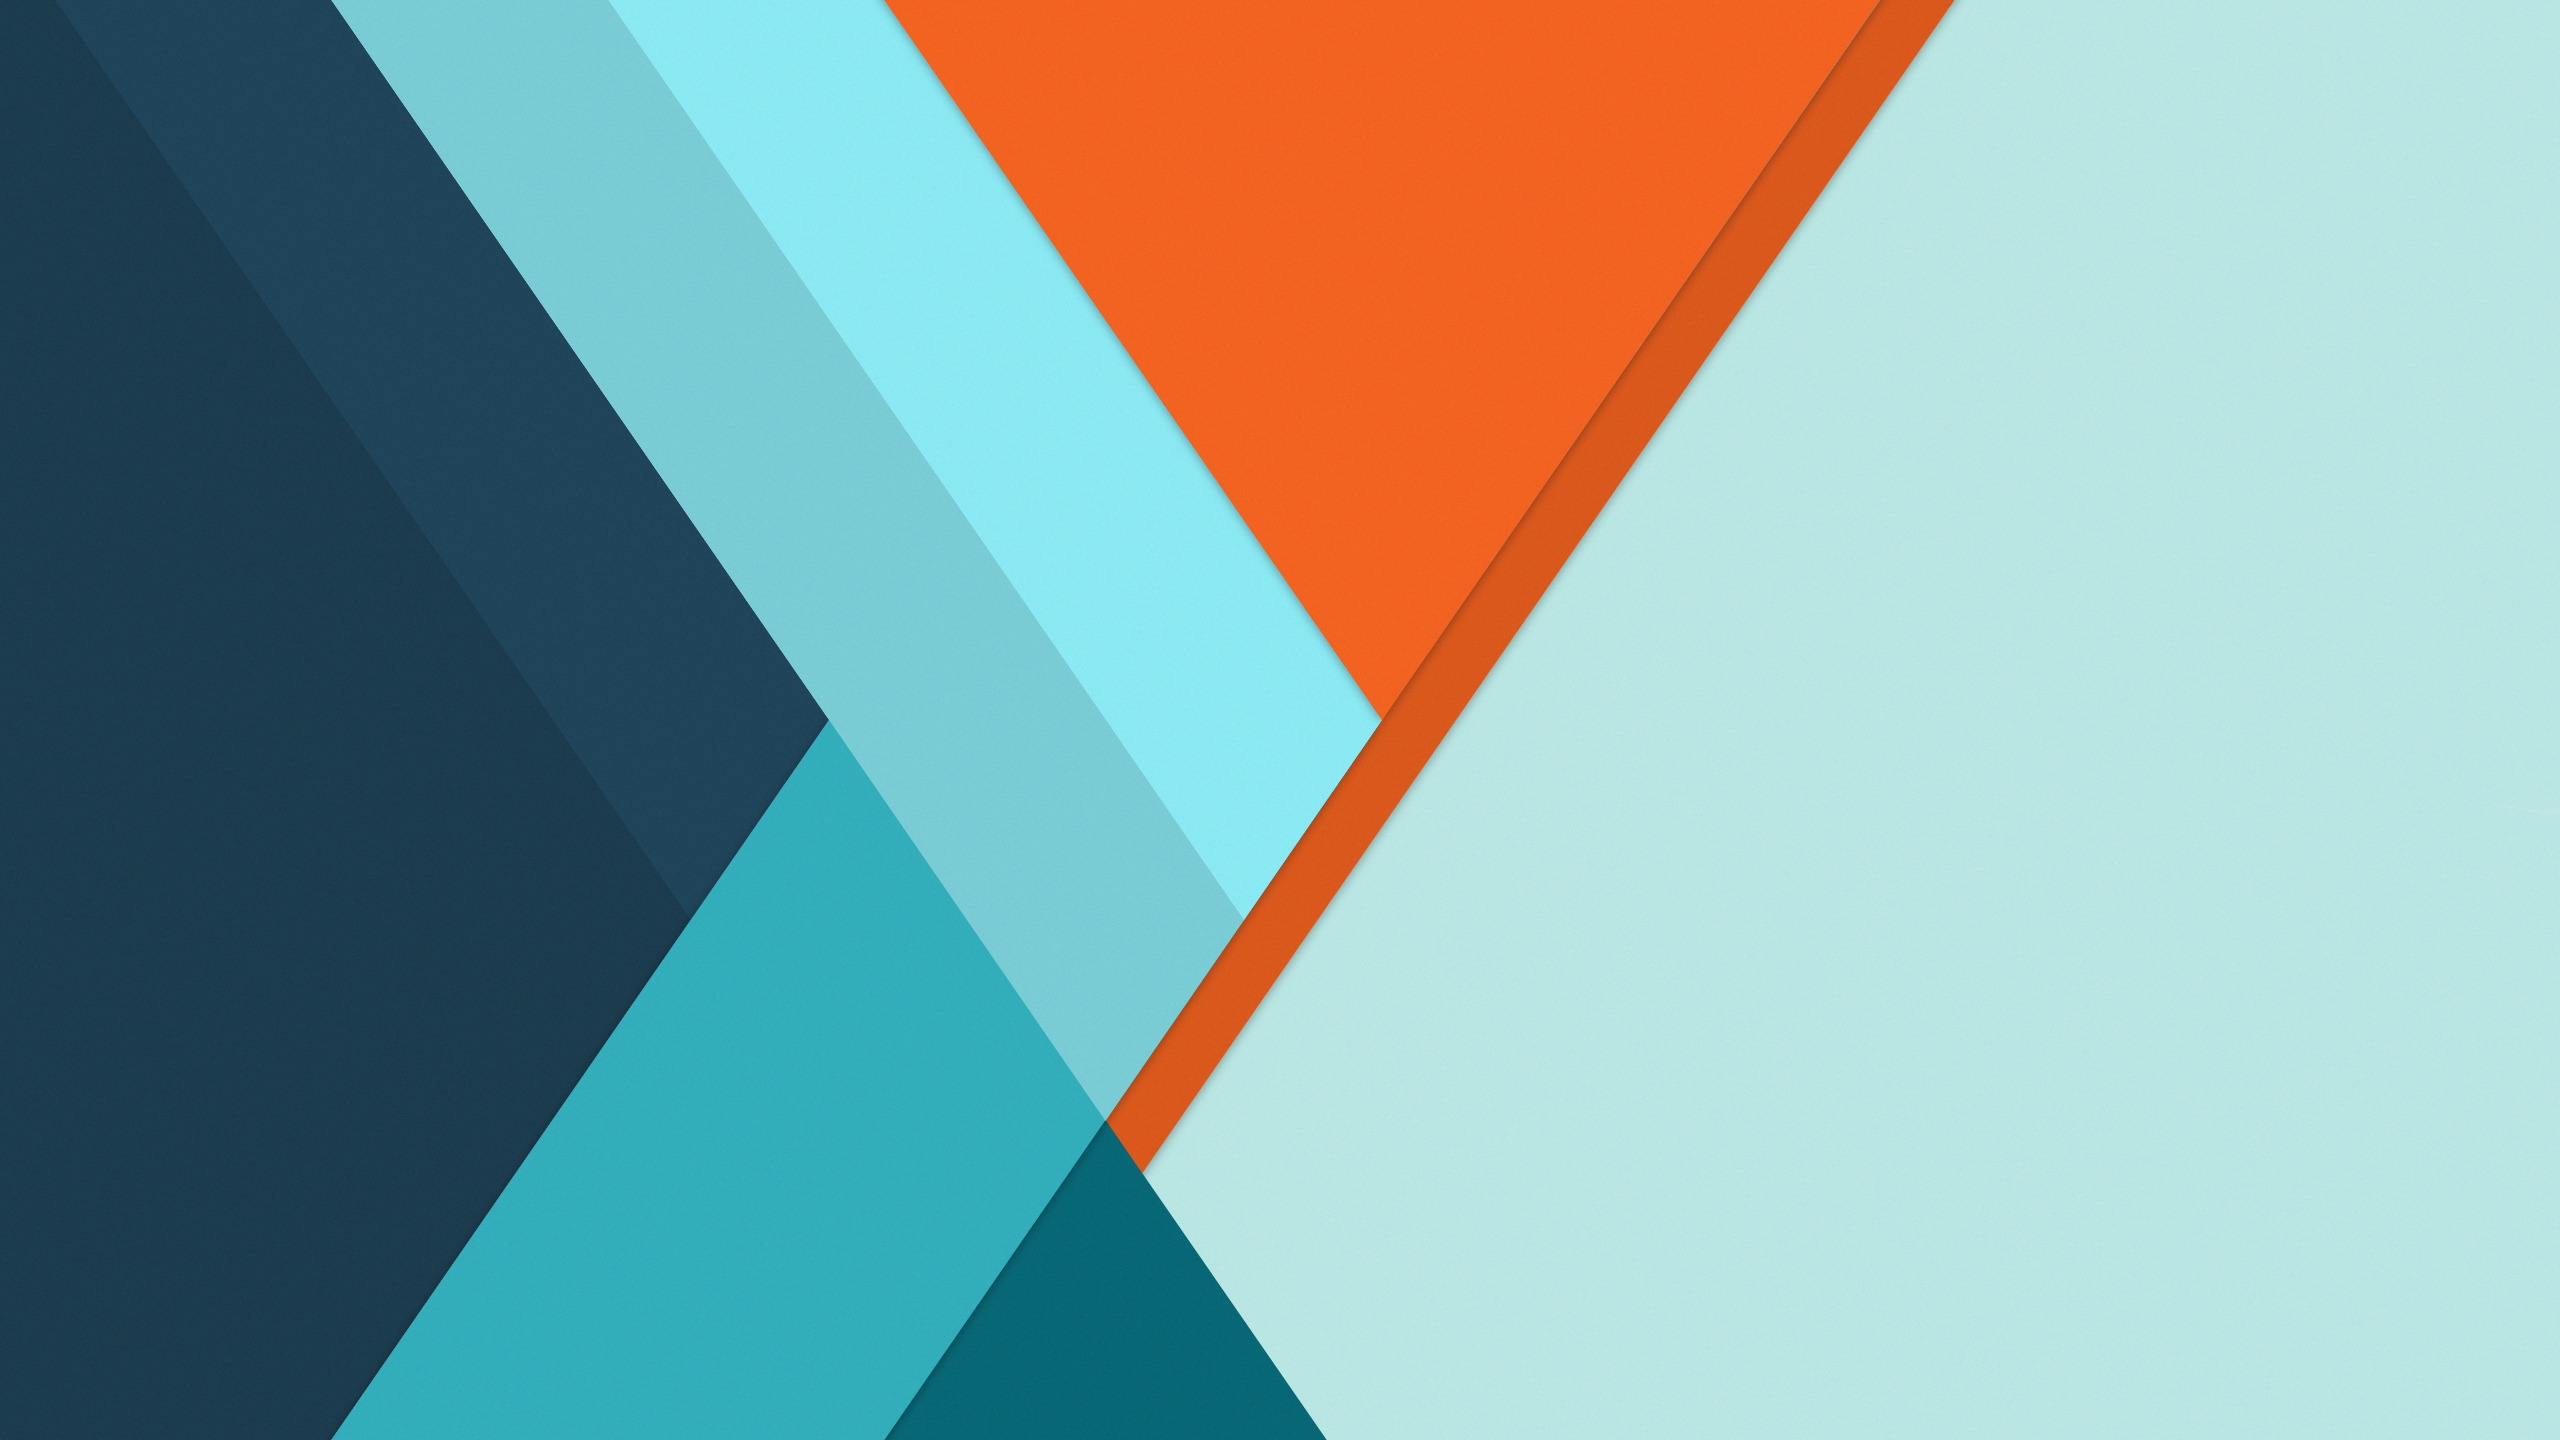 Blue Material Design Minimal Channel Cover